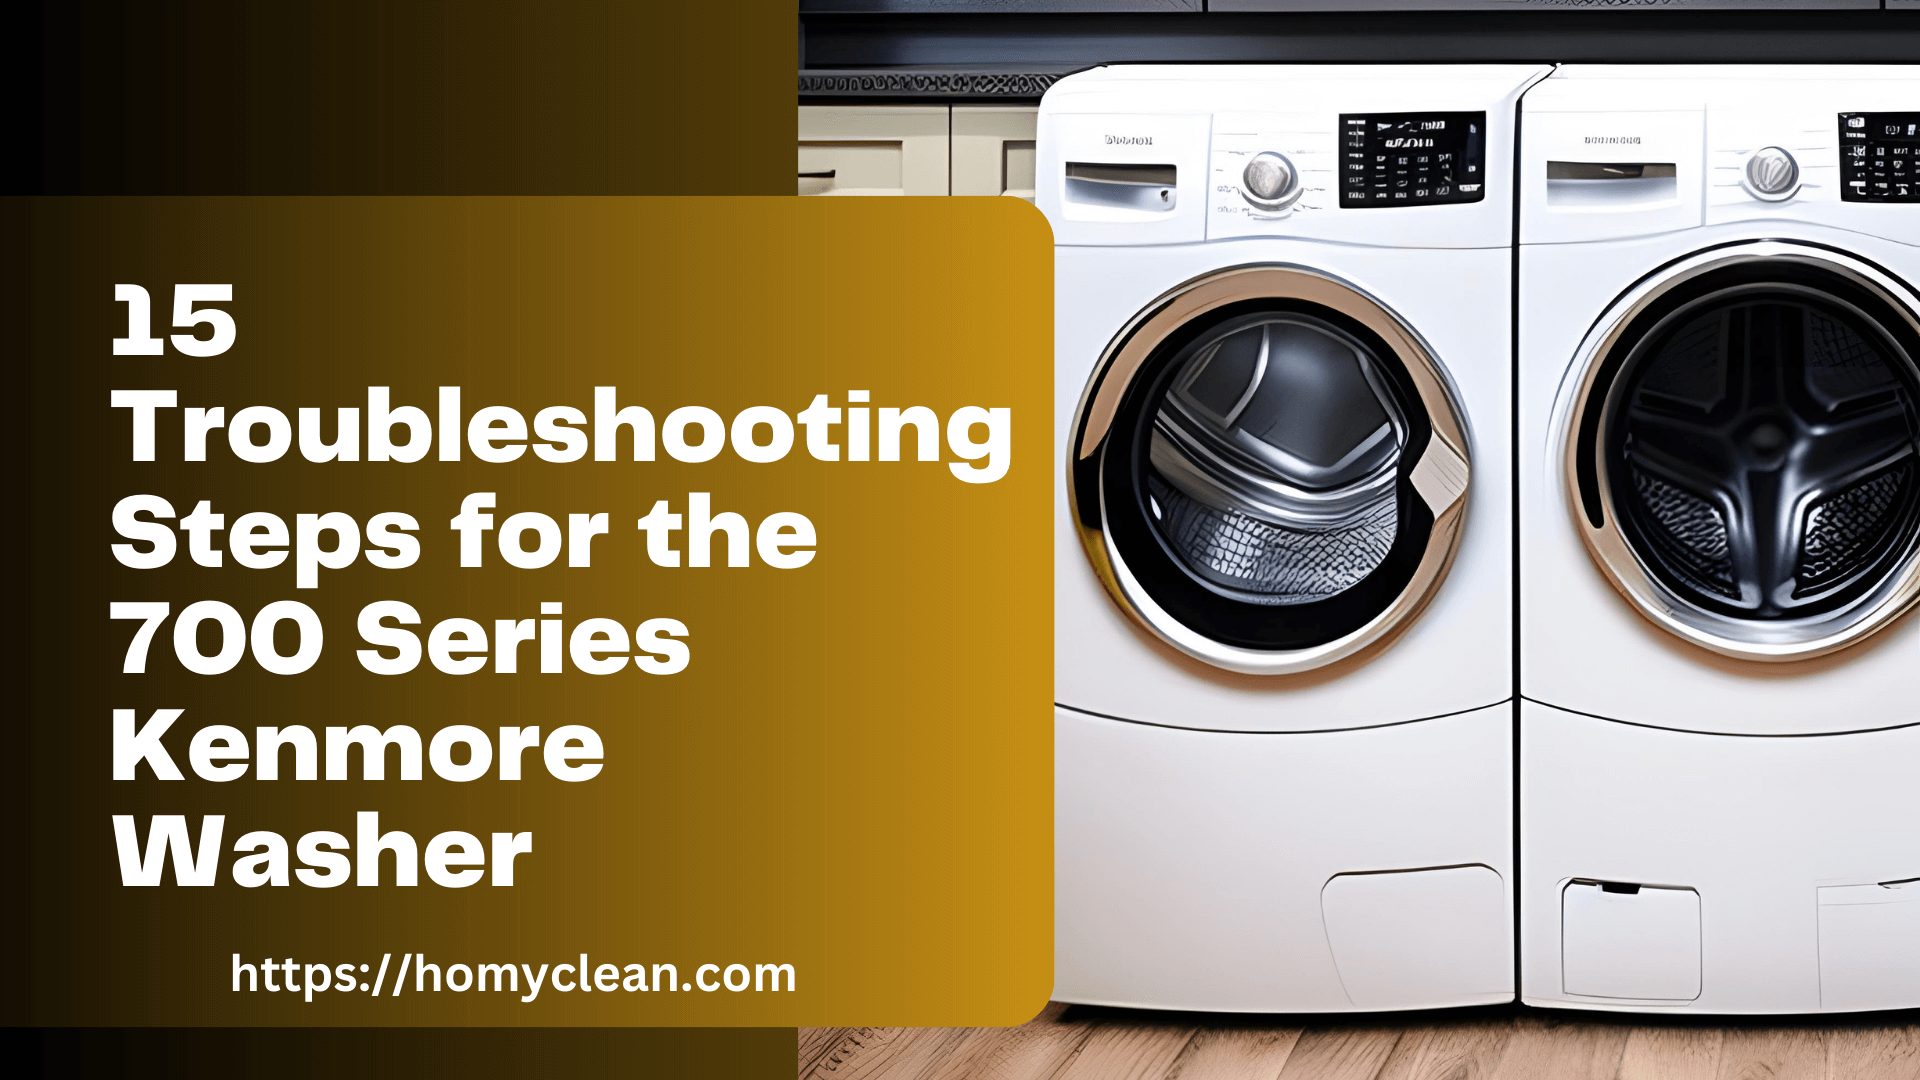 14 Troubleshooting Steps for the 700 Series Kenmore Washer